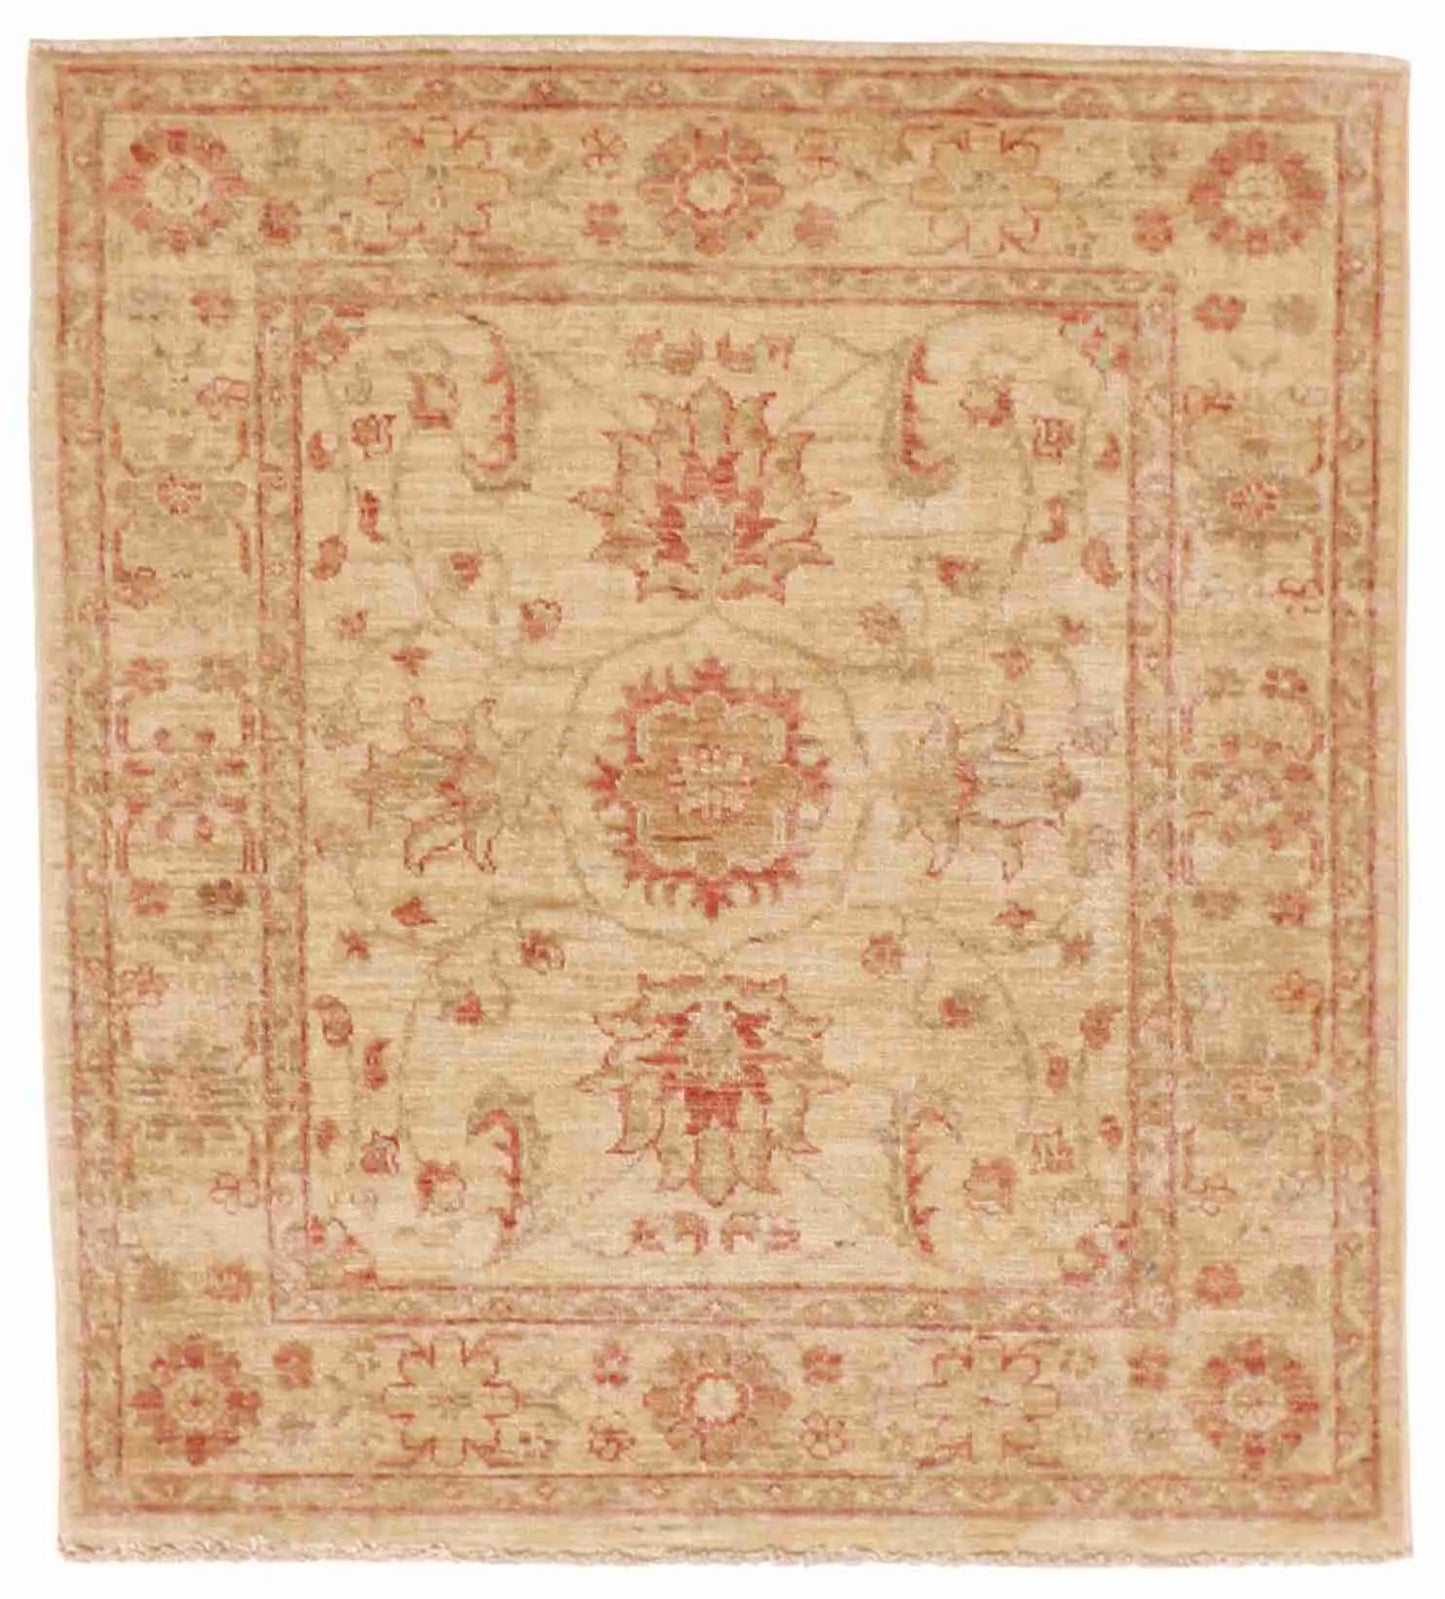 3.1x3.5 - Laver Fine/Wool All Over Rectangle - Hand Knotted Rug